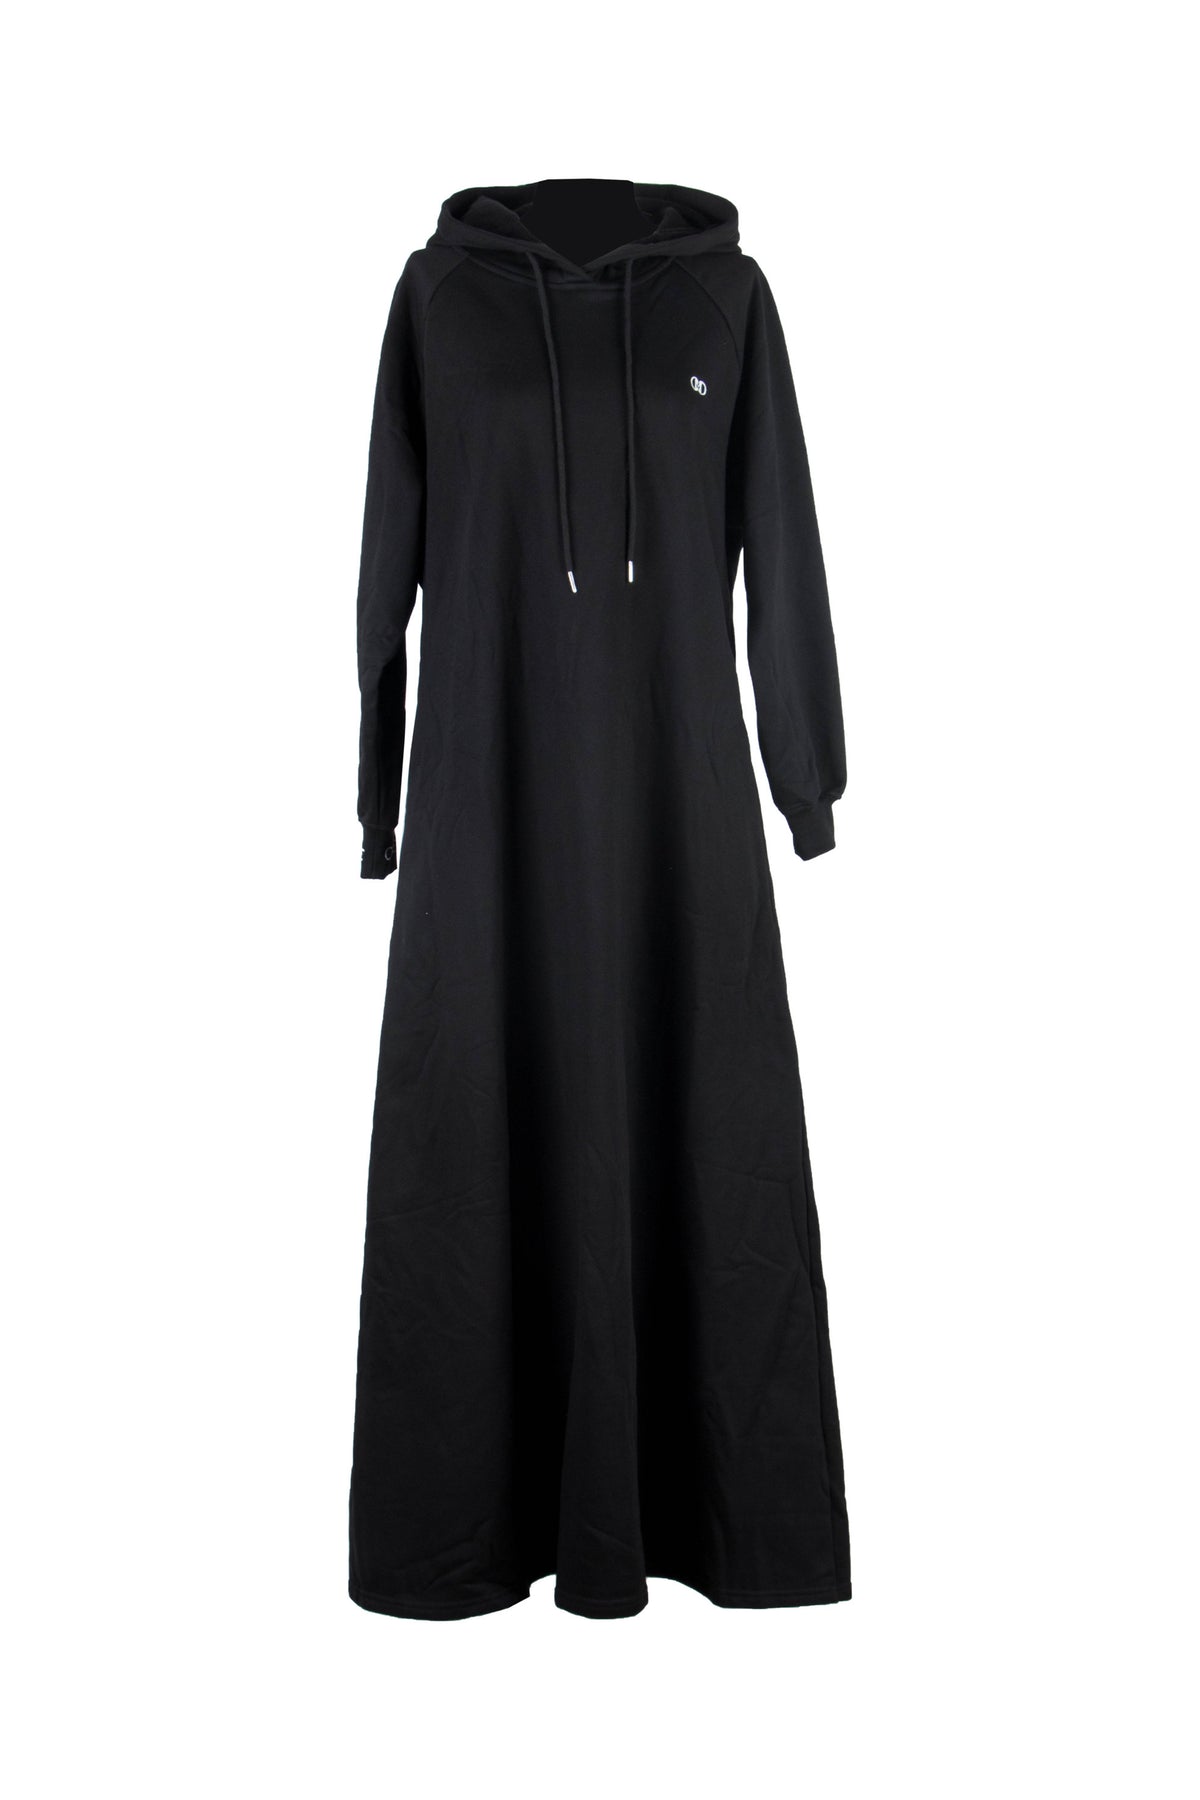 Modest Chic: Aisha Hoodie Floor-length Maxi Hoodie Dress - Must-Have Fall/Winter Fashion for Cozy Elegance